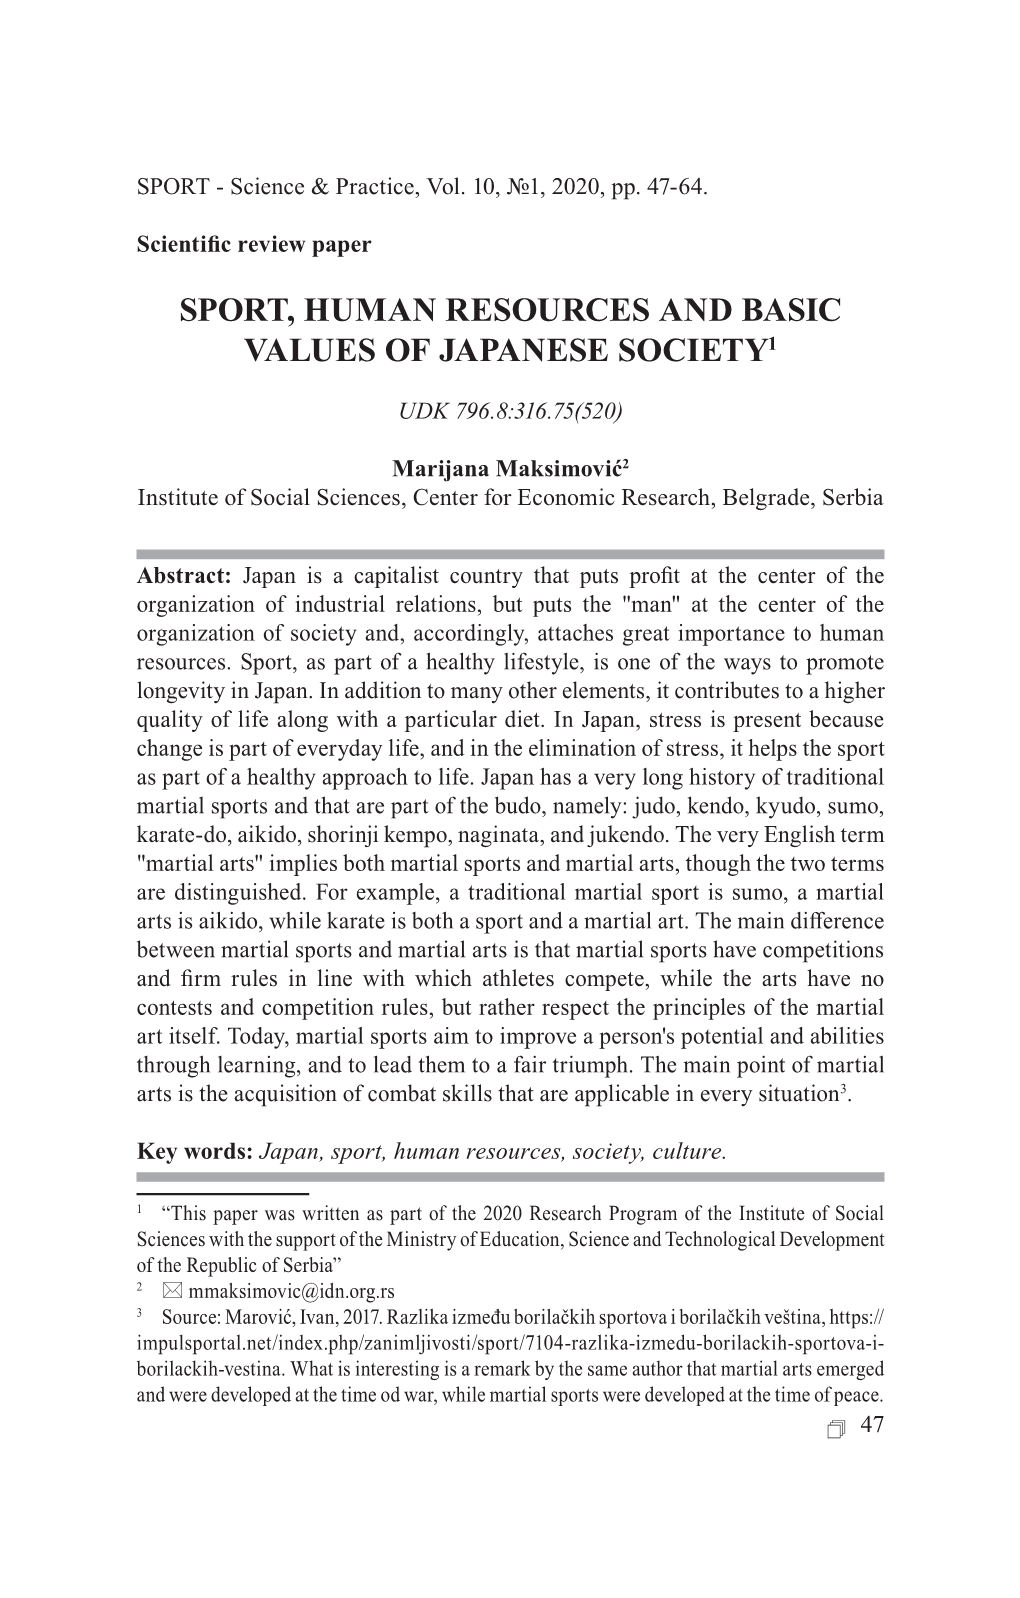 Sport, Human Resources and Basic Values of Japanese Society1